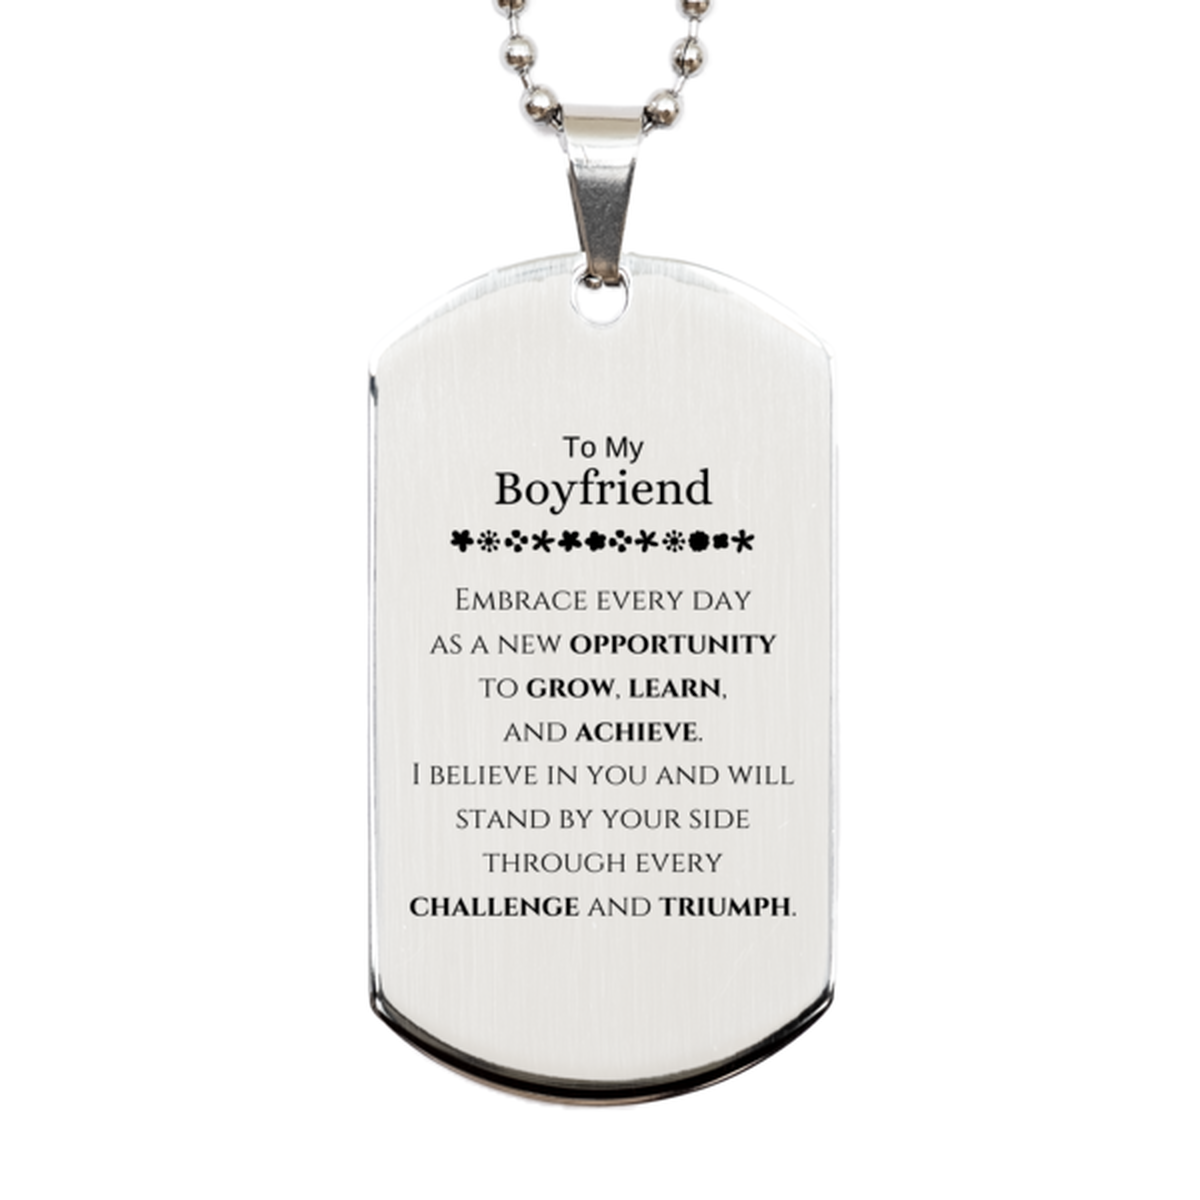 To My Boyfriend Gifts, I believe in you and will stand by your side, Inspirational Silver Dog Tag For Boyfriend, Birthday Christmas Motivational Boyfriend Gifts